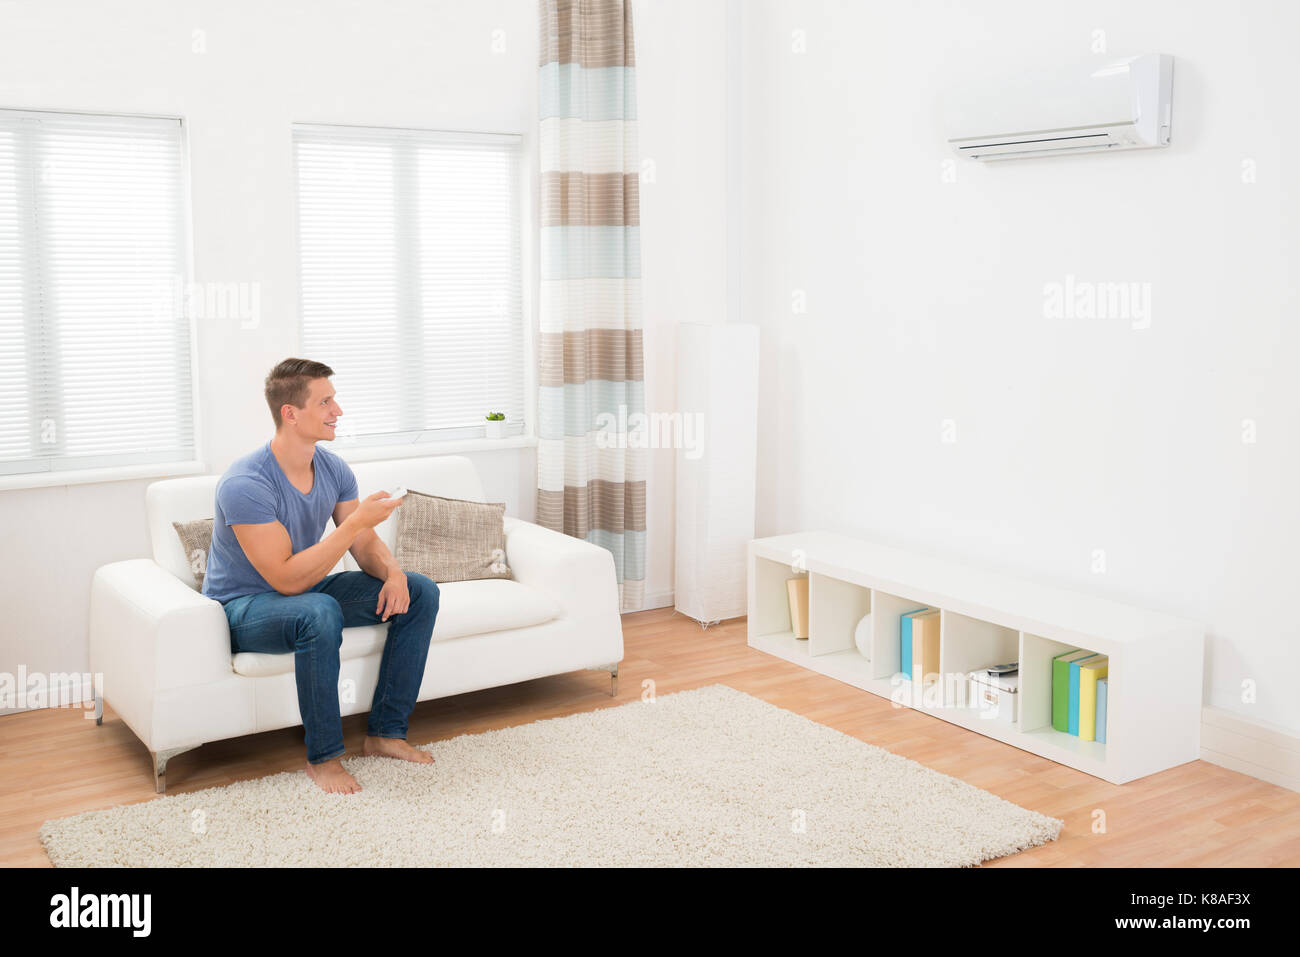 Young Man On Sofa Operating Air Conditioner With Remote Control Stock Photo